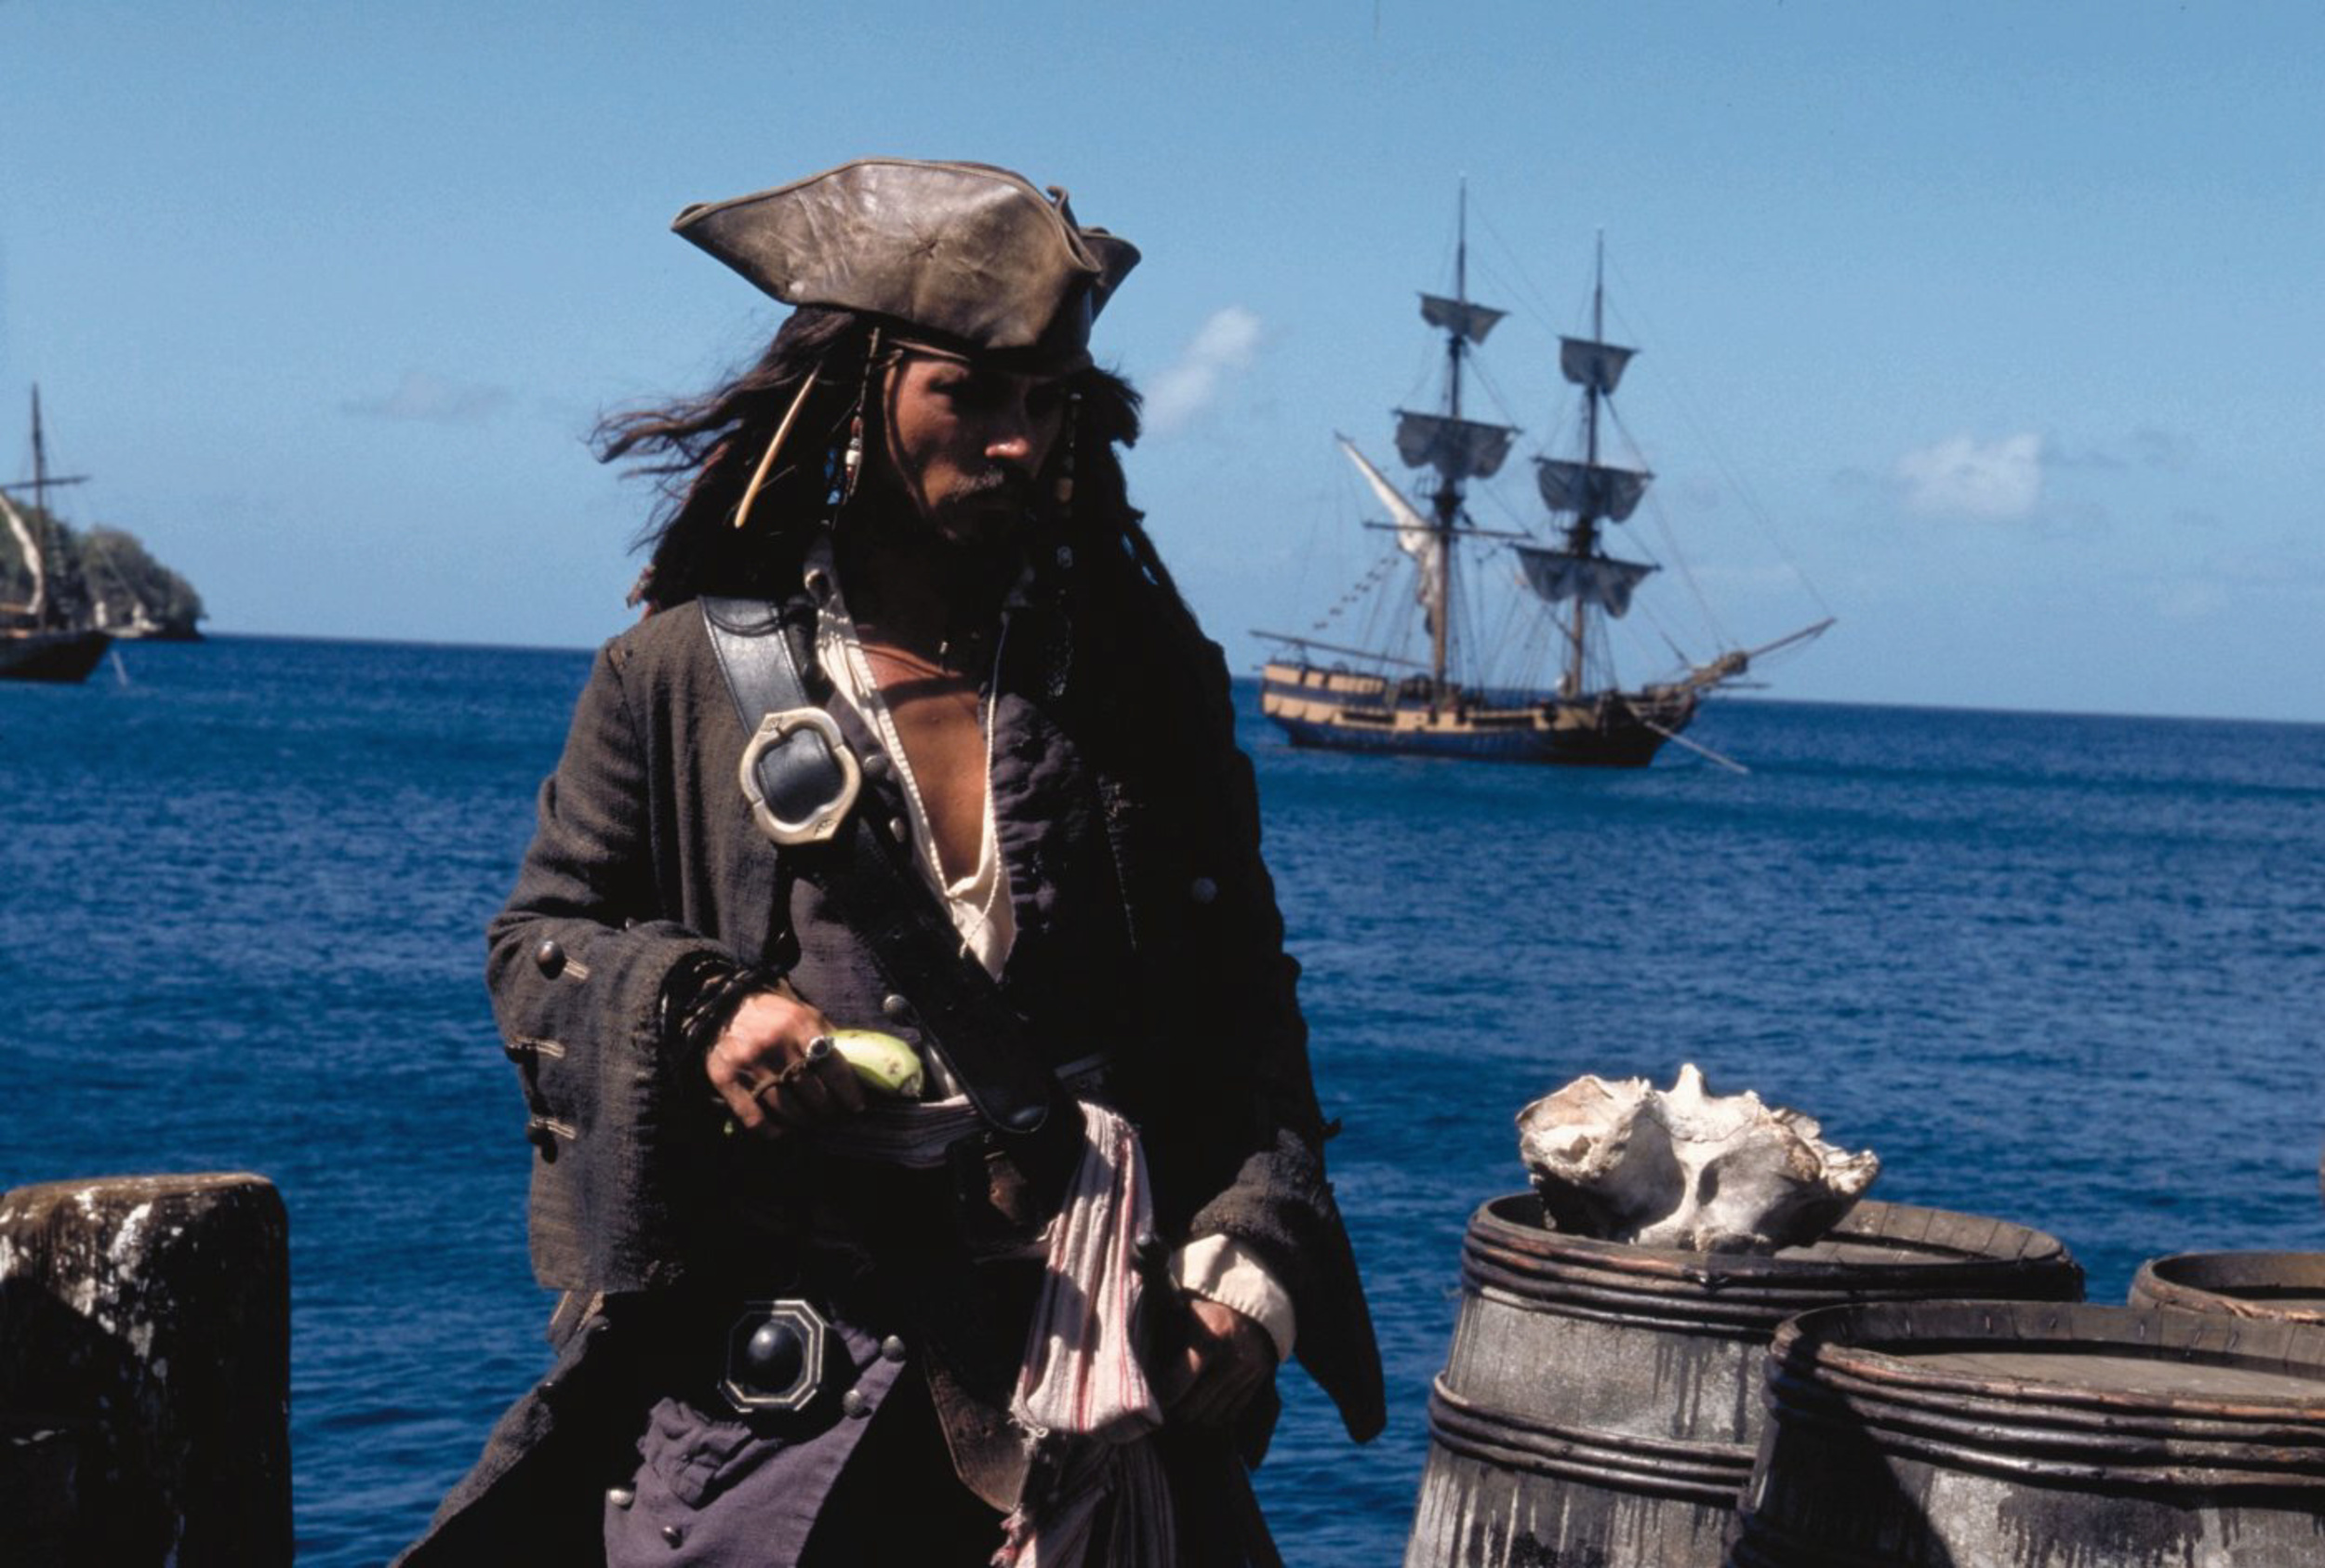 <p><em>Curse of the Black Pearl </em>has yielded, to date, four sequels. Over these movies, the franchise has become one of the most lucrative ever. Two of the films made over $1 billion worldwide. Four of the five films were once in the top 50 in total box office, and two of the movies remain in the top 50. Currently, it’s one of the 15 highest-grossing franchise ever.</p><p><a href='https://www.msn.com/en-us/community/channel/vid-cj9pqbr0vn9in2b6ddcd8sfgpfq6x6utp44fssrv6mc2gtybw0us'>Follow us on MSN to see more of our exclusive entertainment content.</a></p>